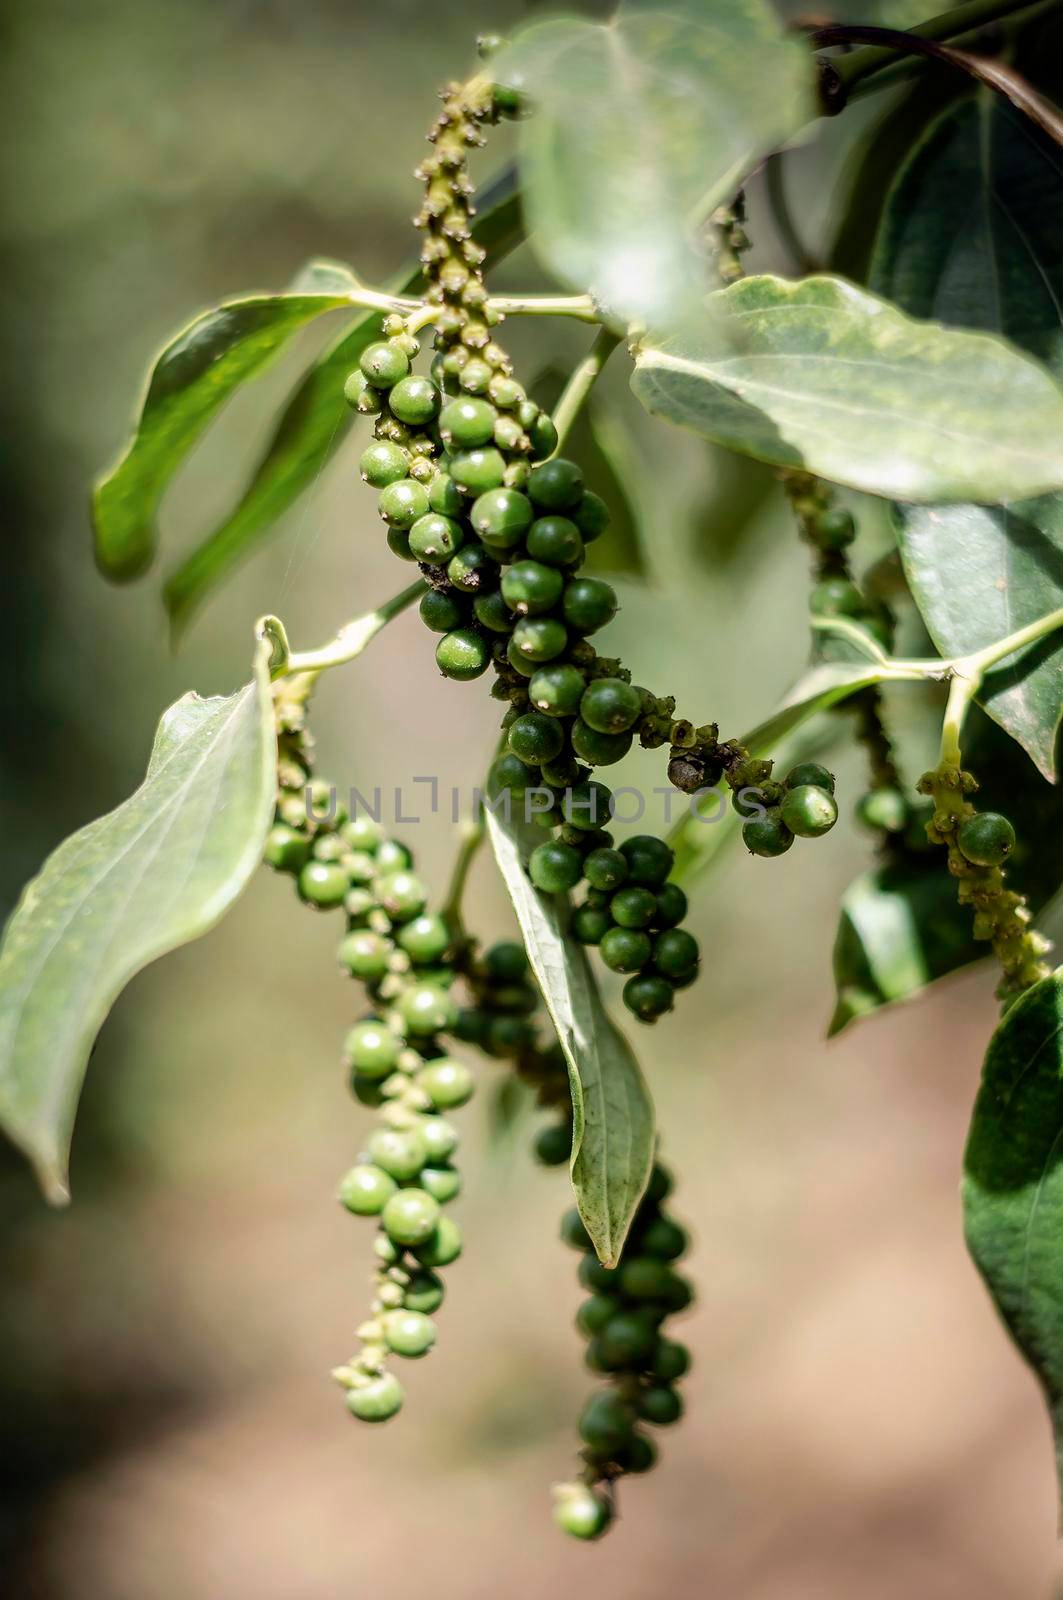 organic peppercorn pods on pepper vine plant in kampot cambodia by jackmalipan